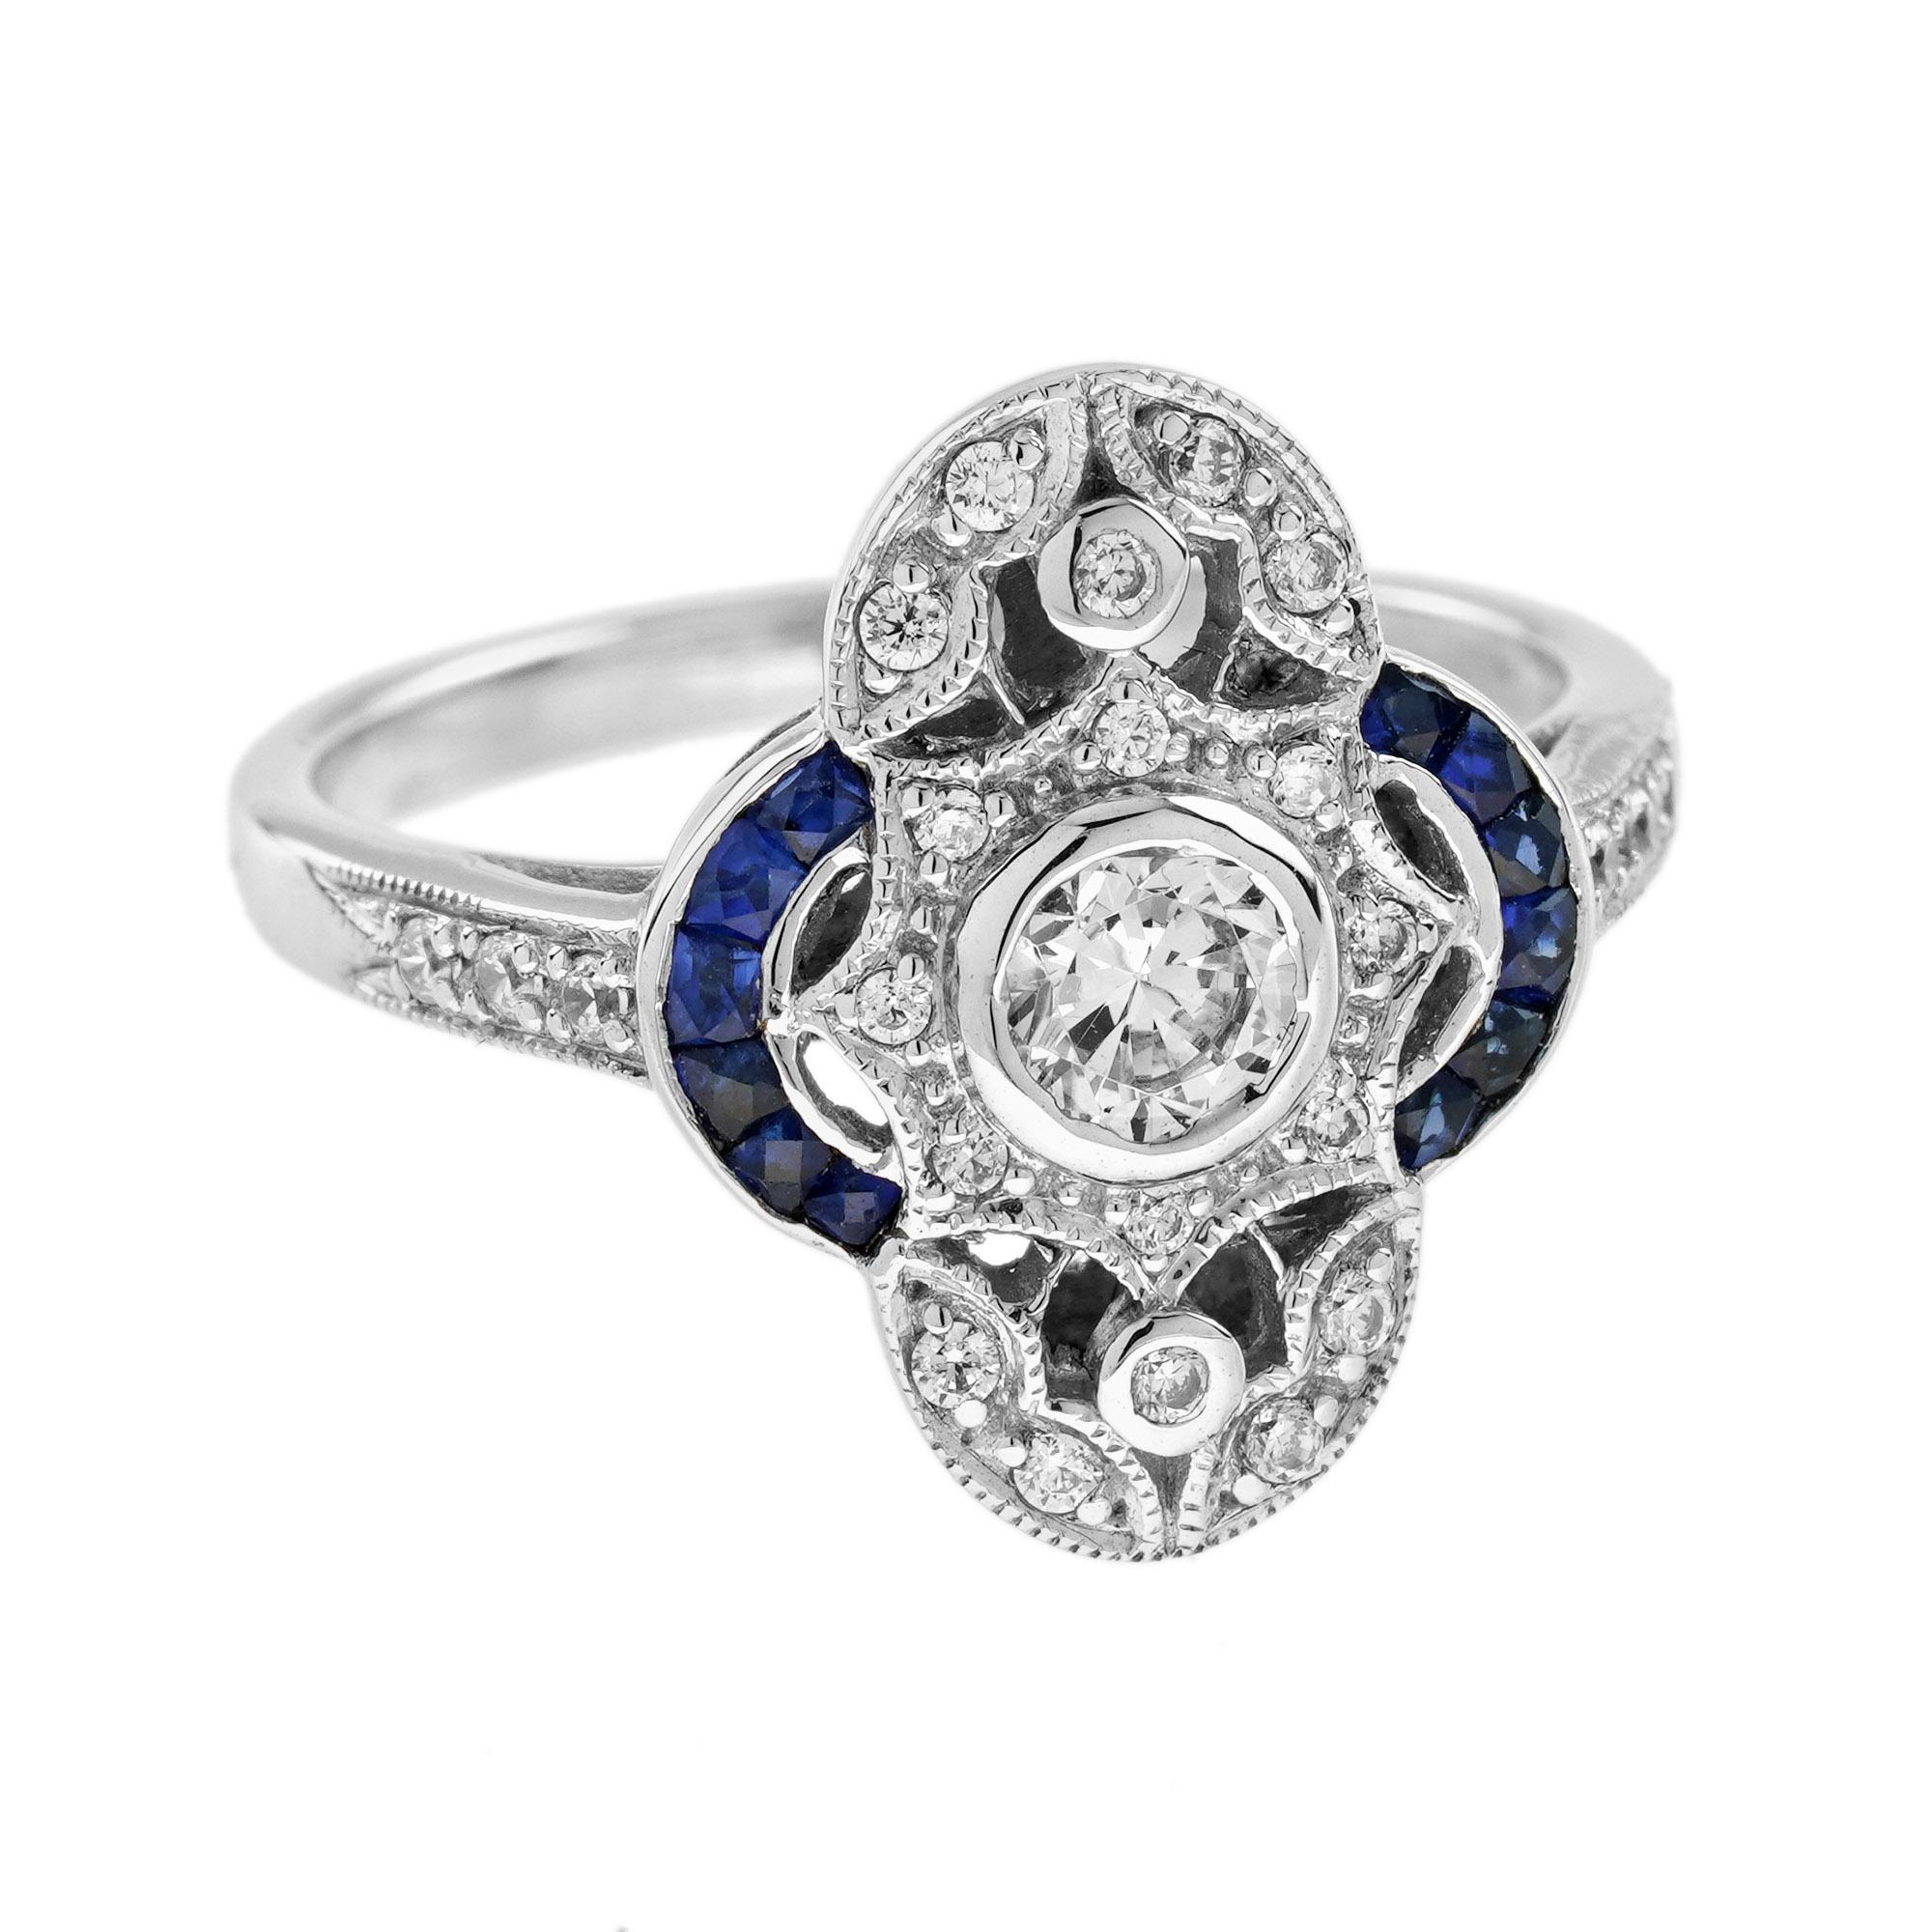 For Sale:  Diamond and Blue Sapphire Art Deco Style Cluster Ring in 18K White Gold 3